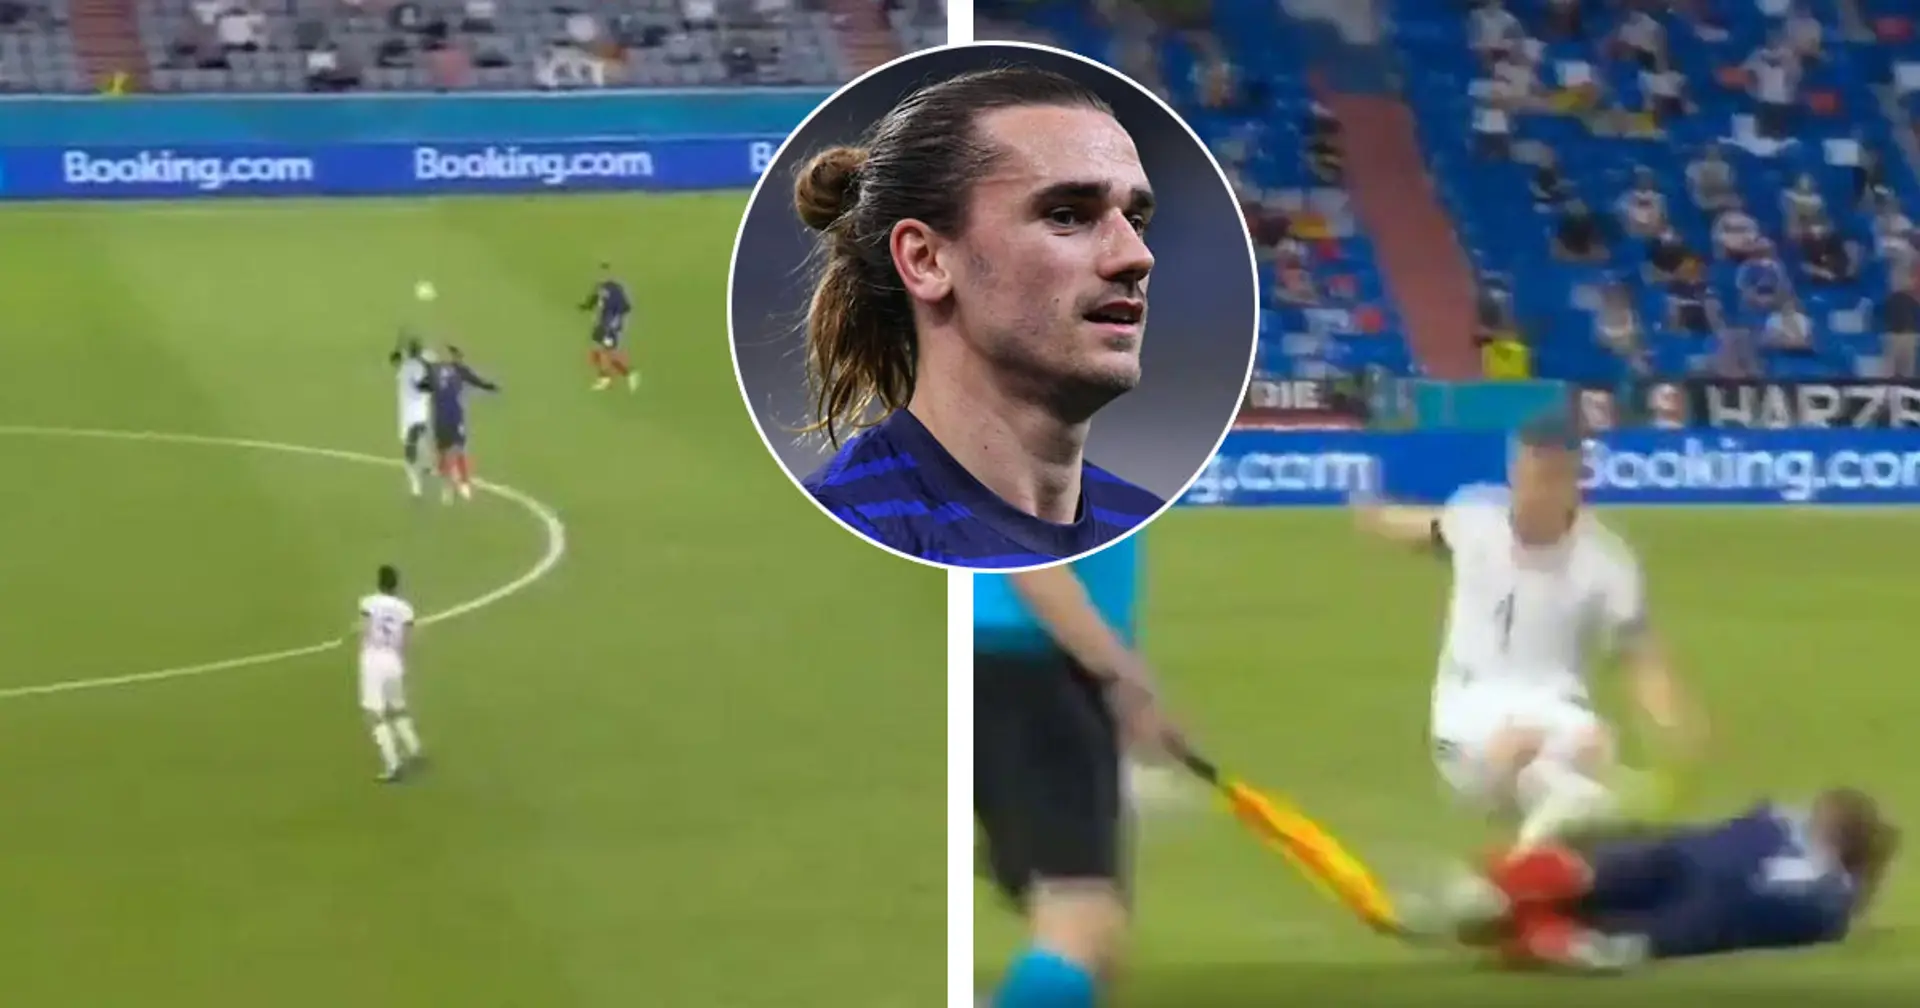 'A monster': Griezmann presses 4 Germany players, finishes move with impeccable tackle